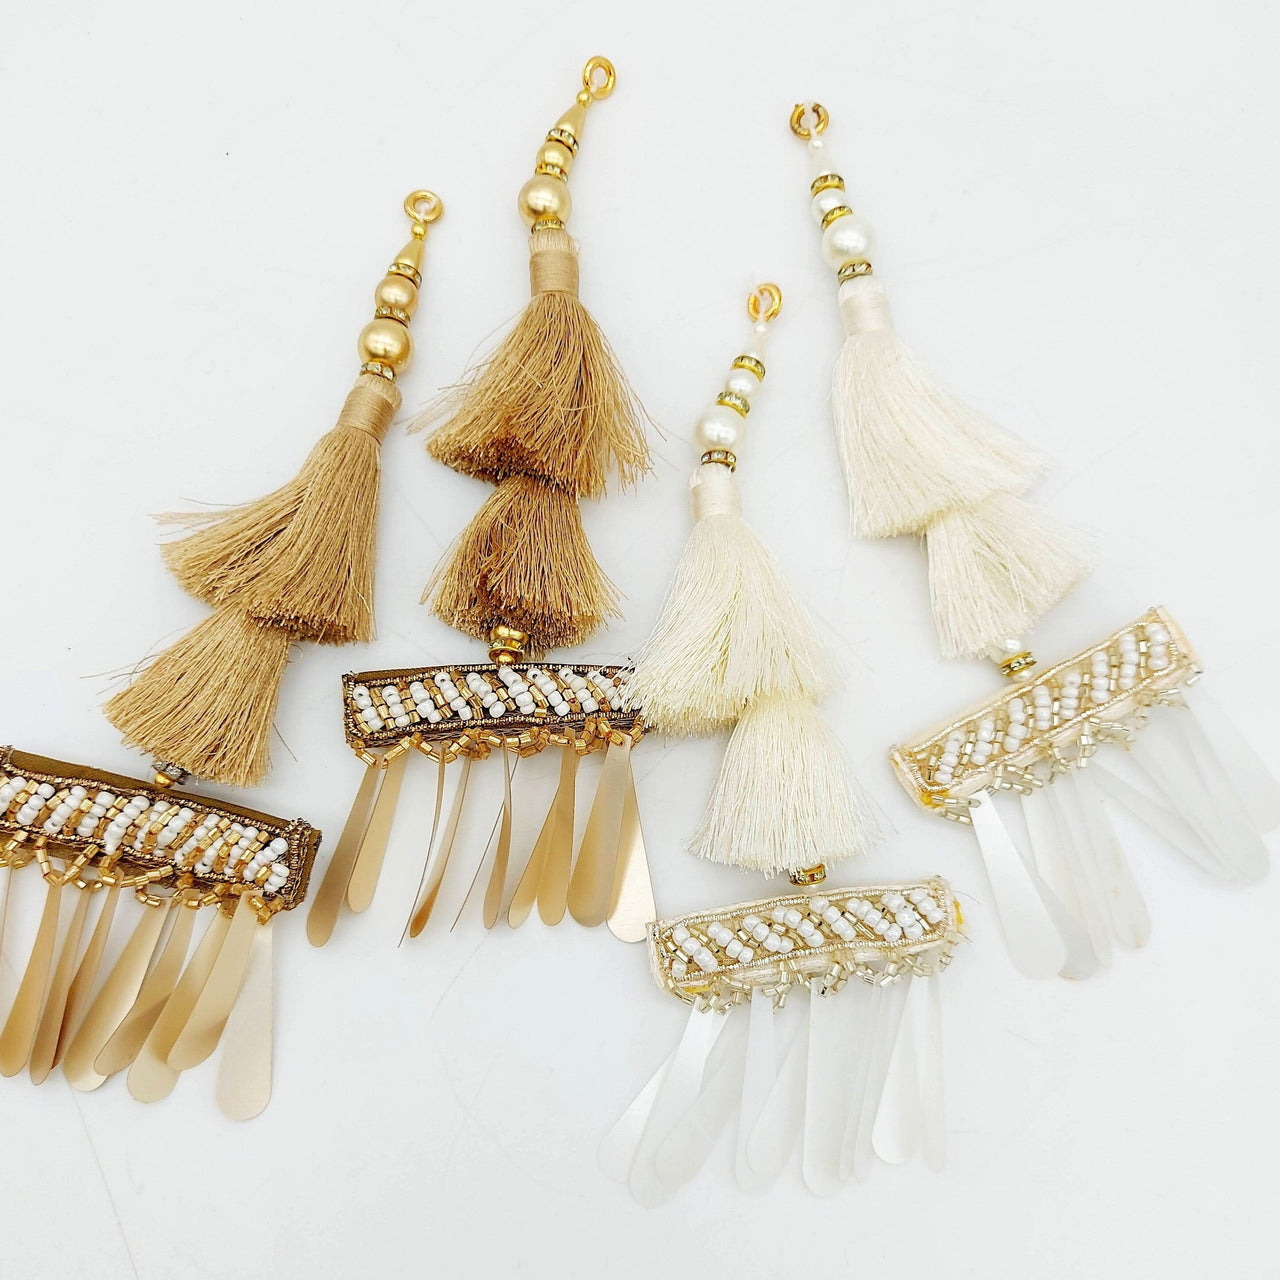 Gold Tassels With Long Gold Sequins And White and Gold Seed Pearl Beads, Beaded Thread Tassel Charms, 2 Pcs